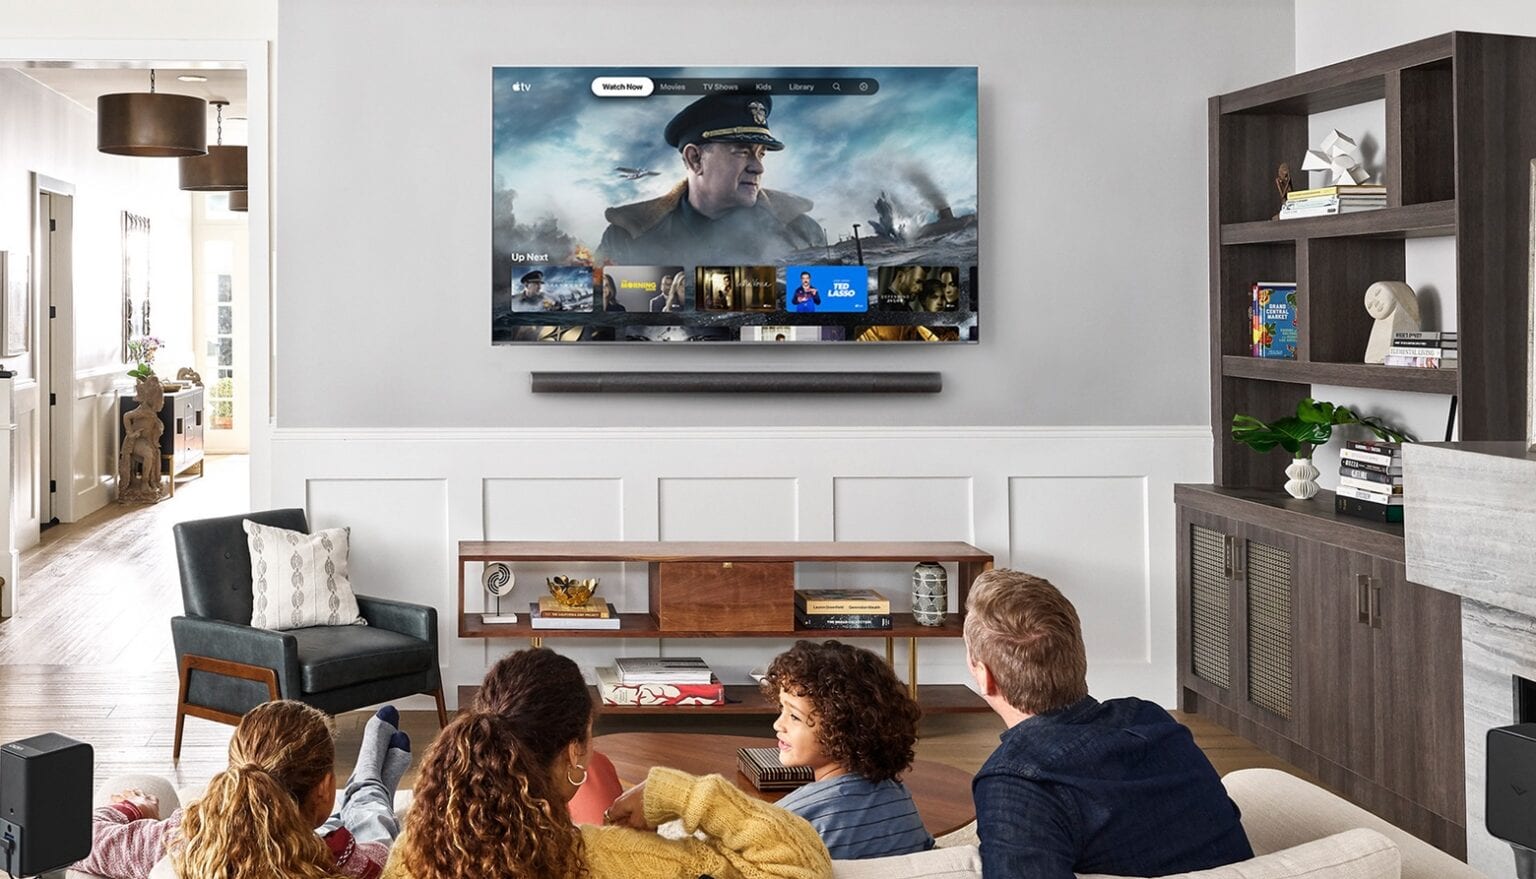 Visio SmartCast TVs and Apple TV together at last.